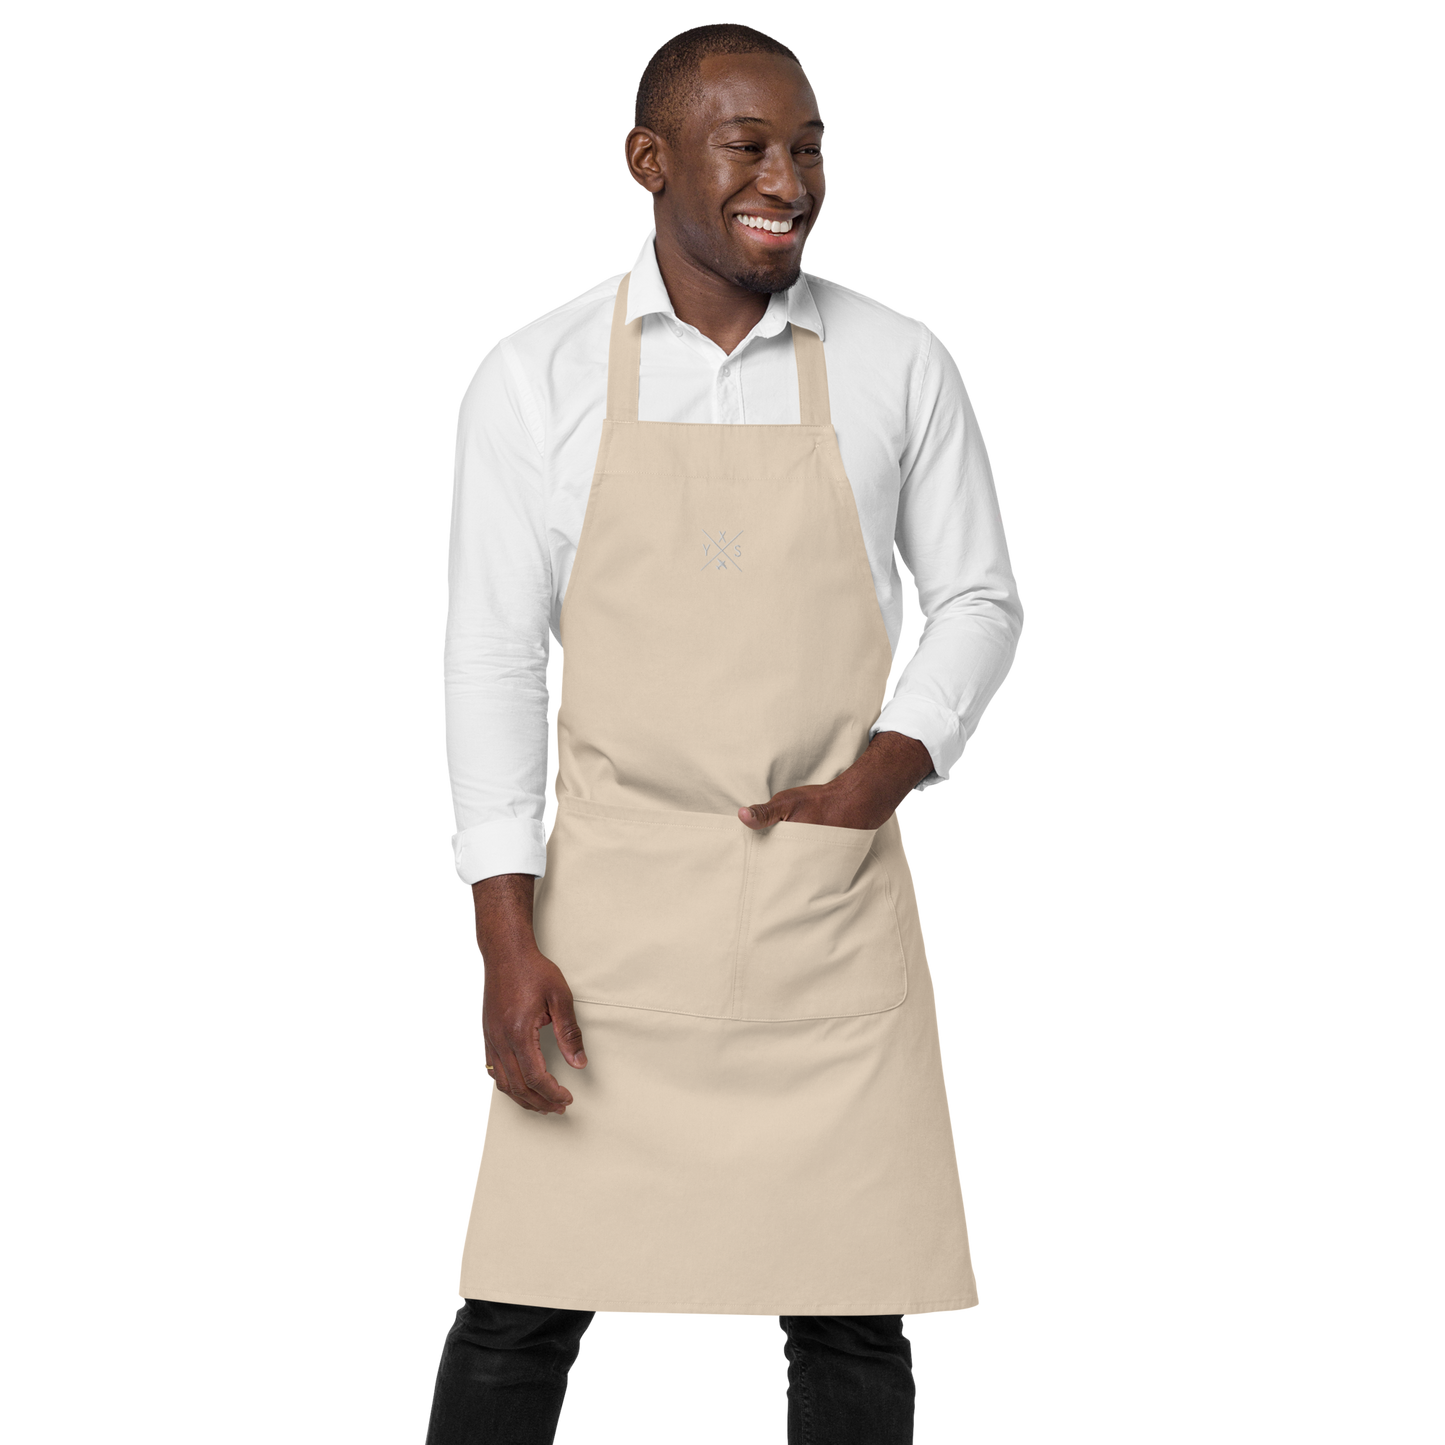 YHM Designs - YXS Prince George Organic Cotton Apron - Crossed-X Design with Airport Code and Vintage Propliner - White Embroidery - Image 14